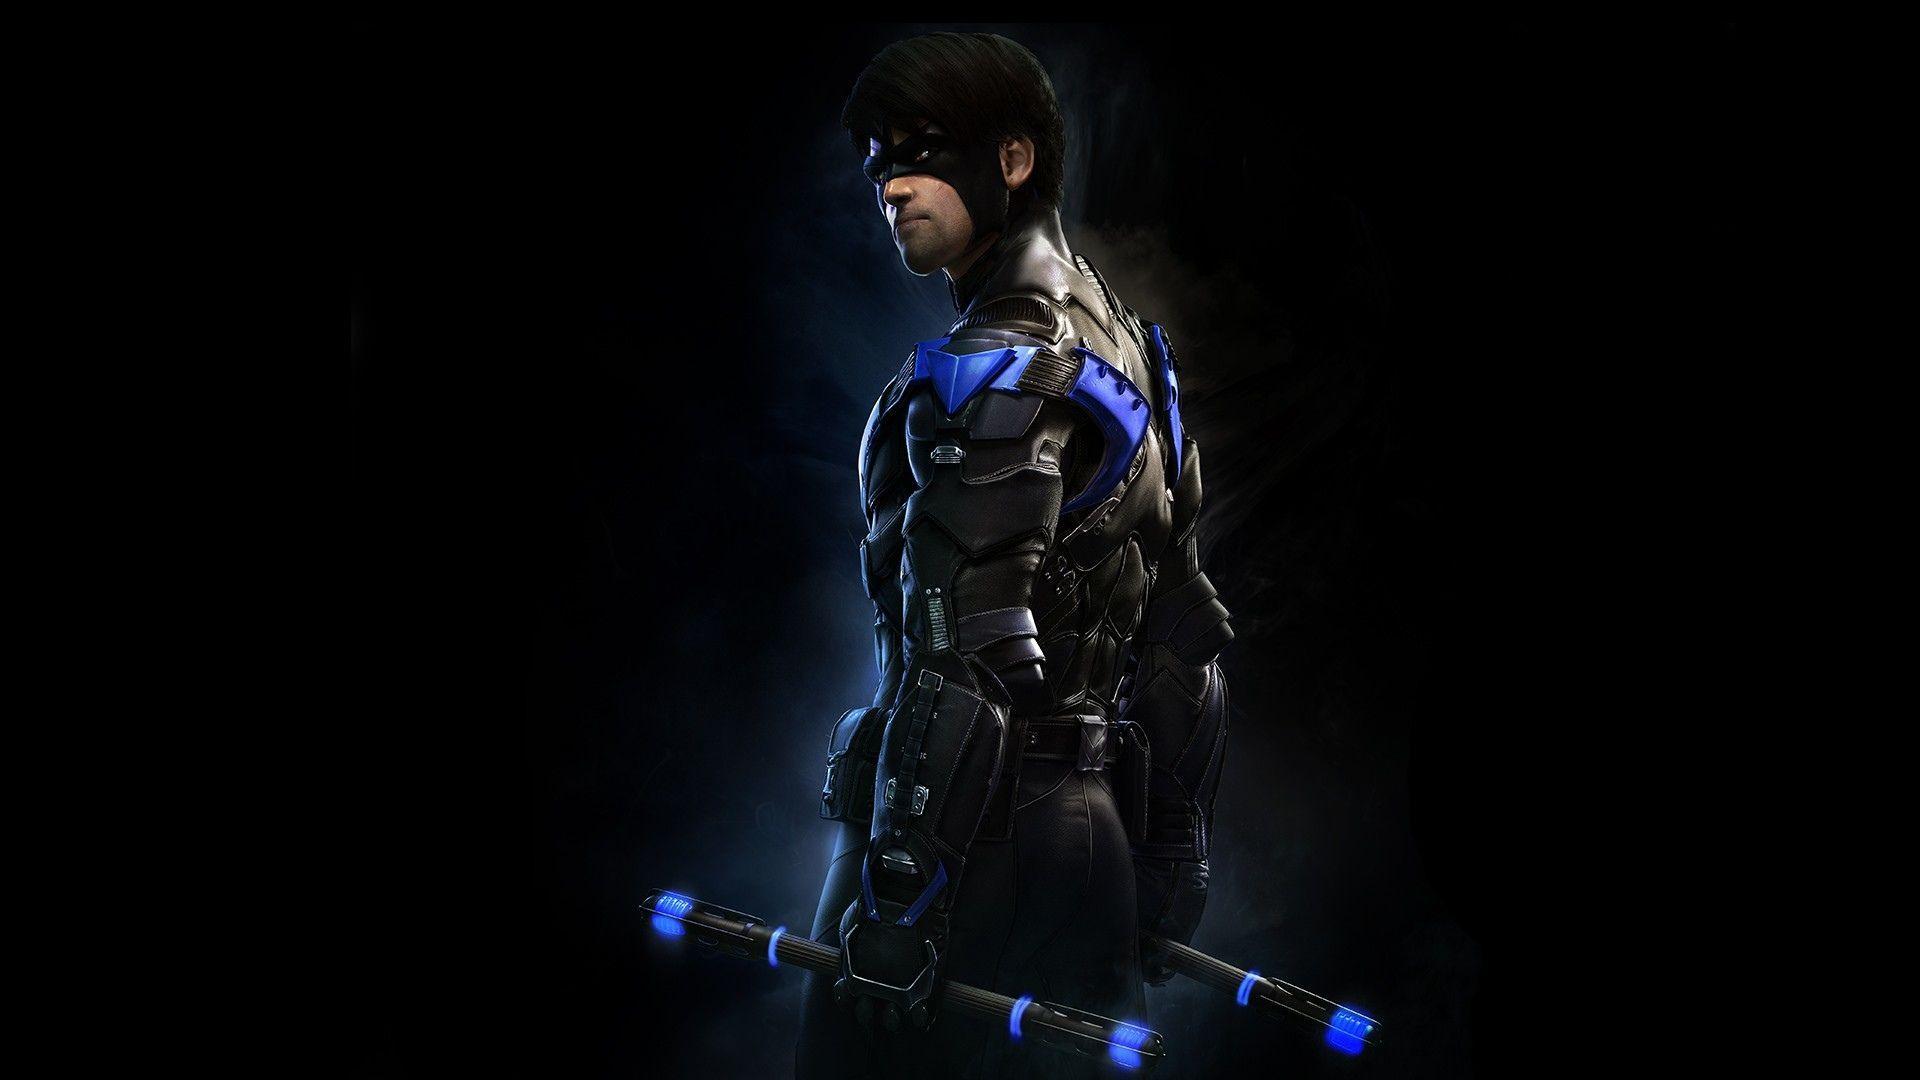 Nightwing HD Wallpaper and Background Image